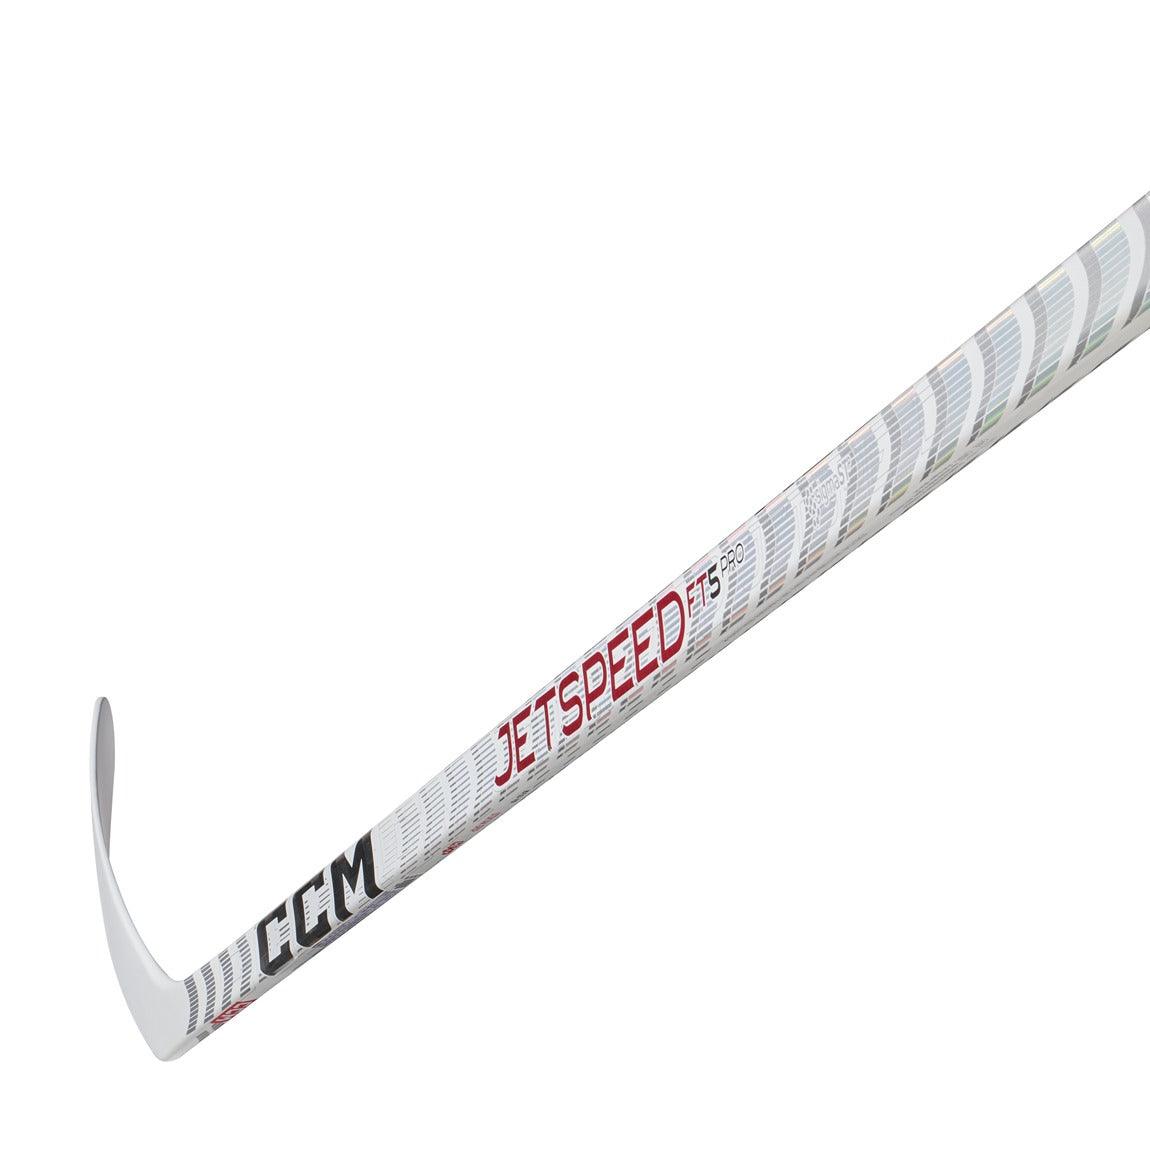 Jetspeed FT5 Pro Hockey Stick (North Edition) - Intermediate - Sports Excellence